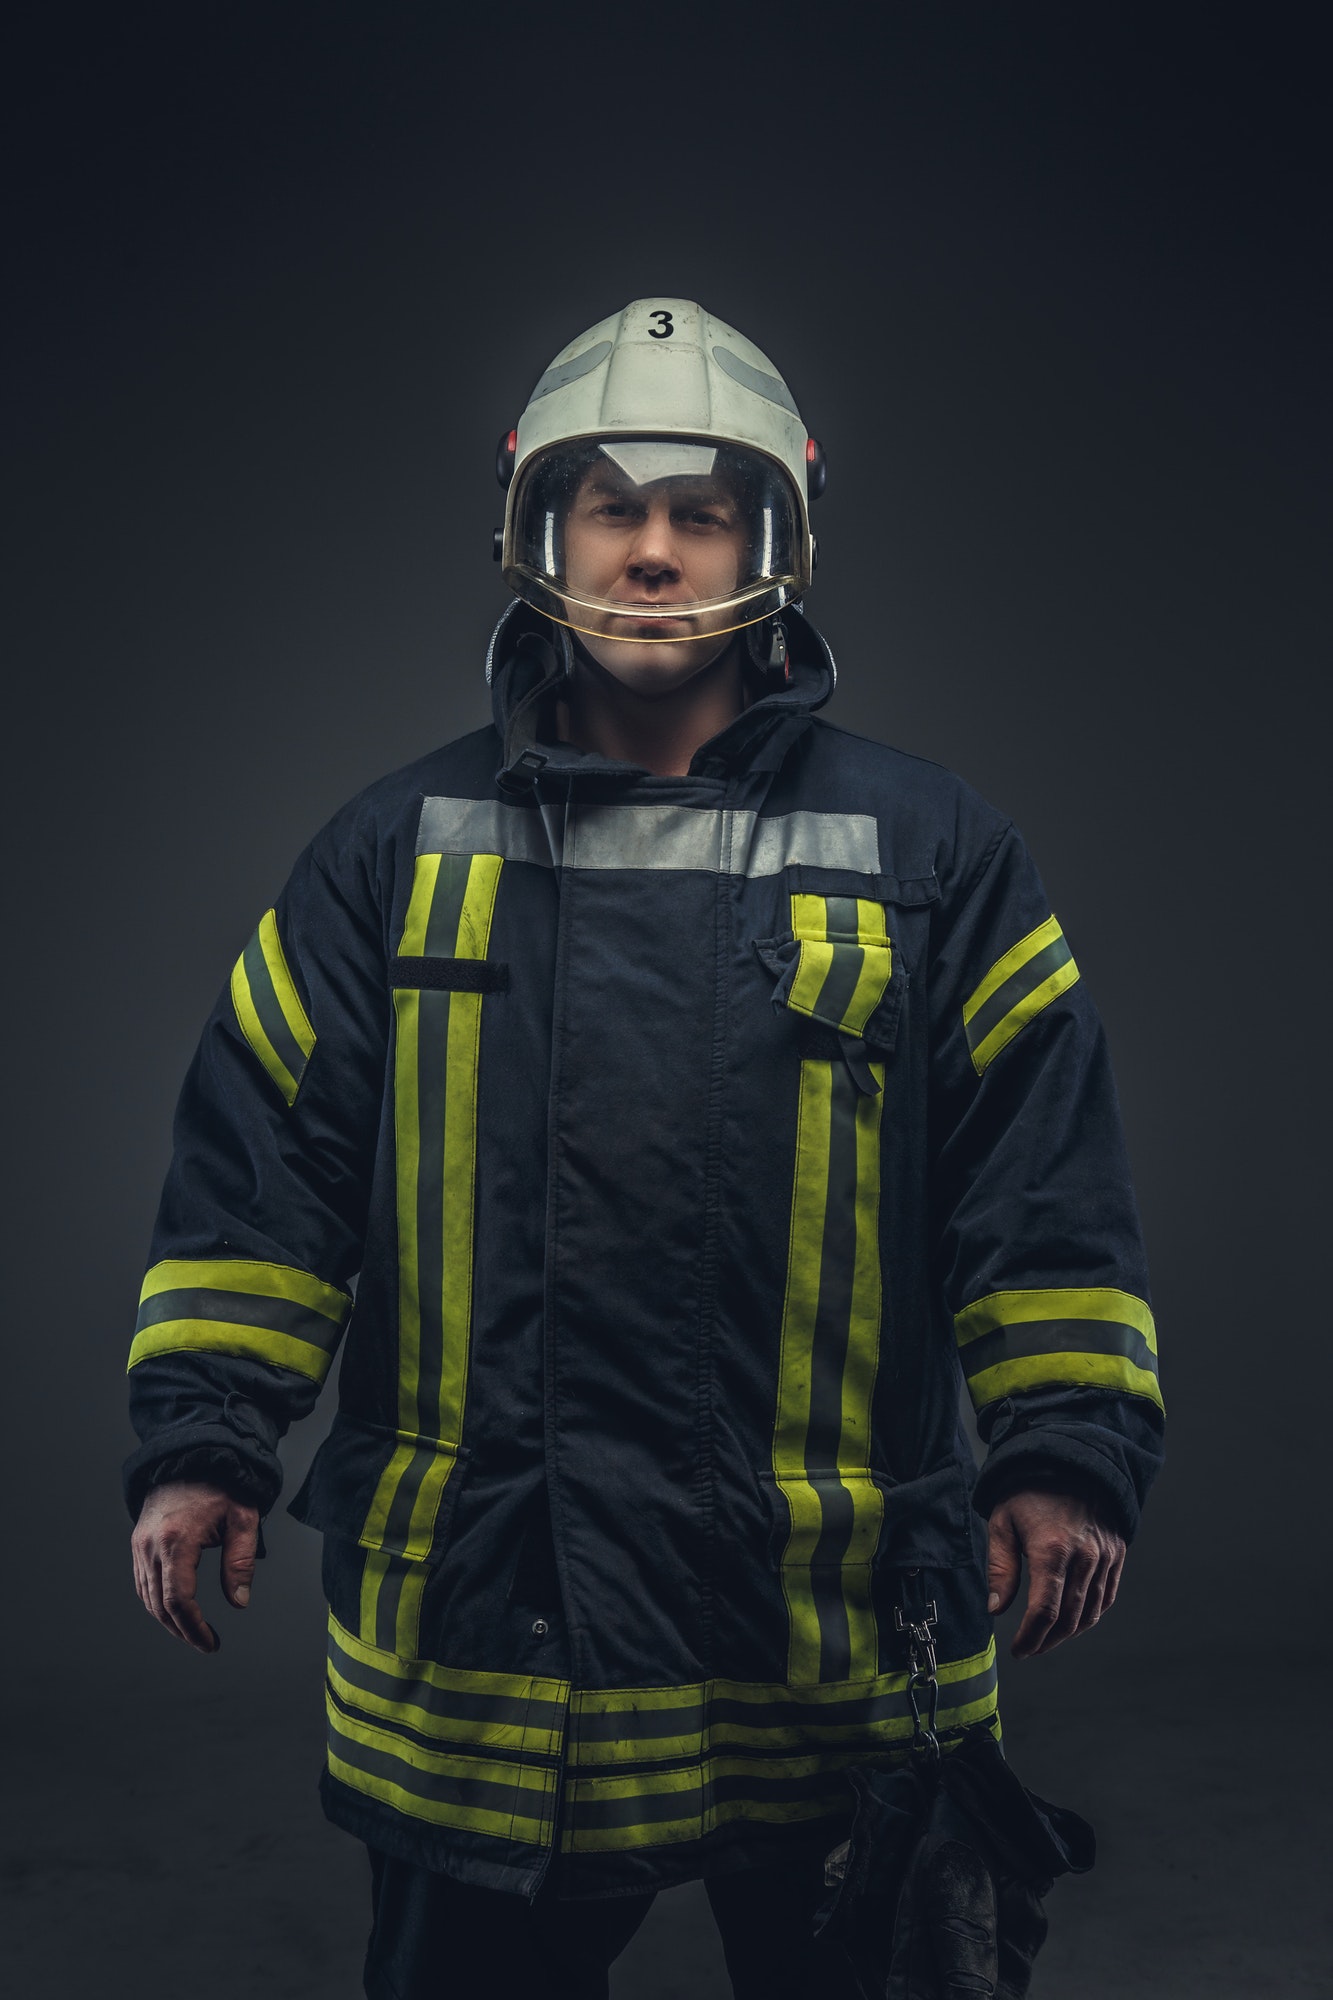 Picture of firefighter in uniform.